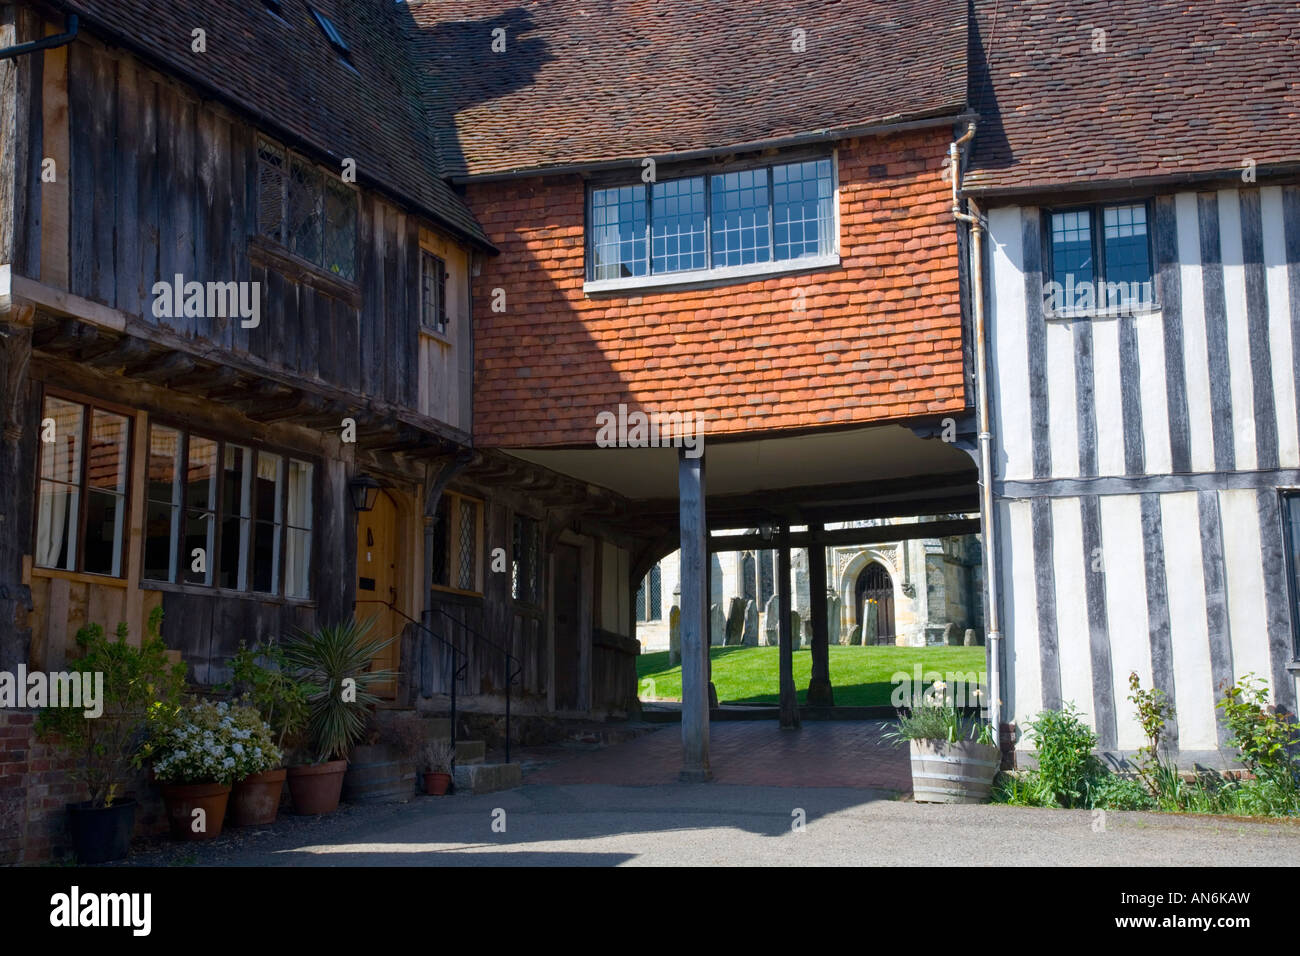 Penshurst, Kent, England. Timbered houses overlooking Leicester Square. Stock Photo